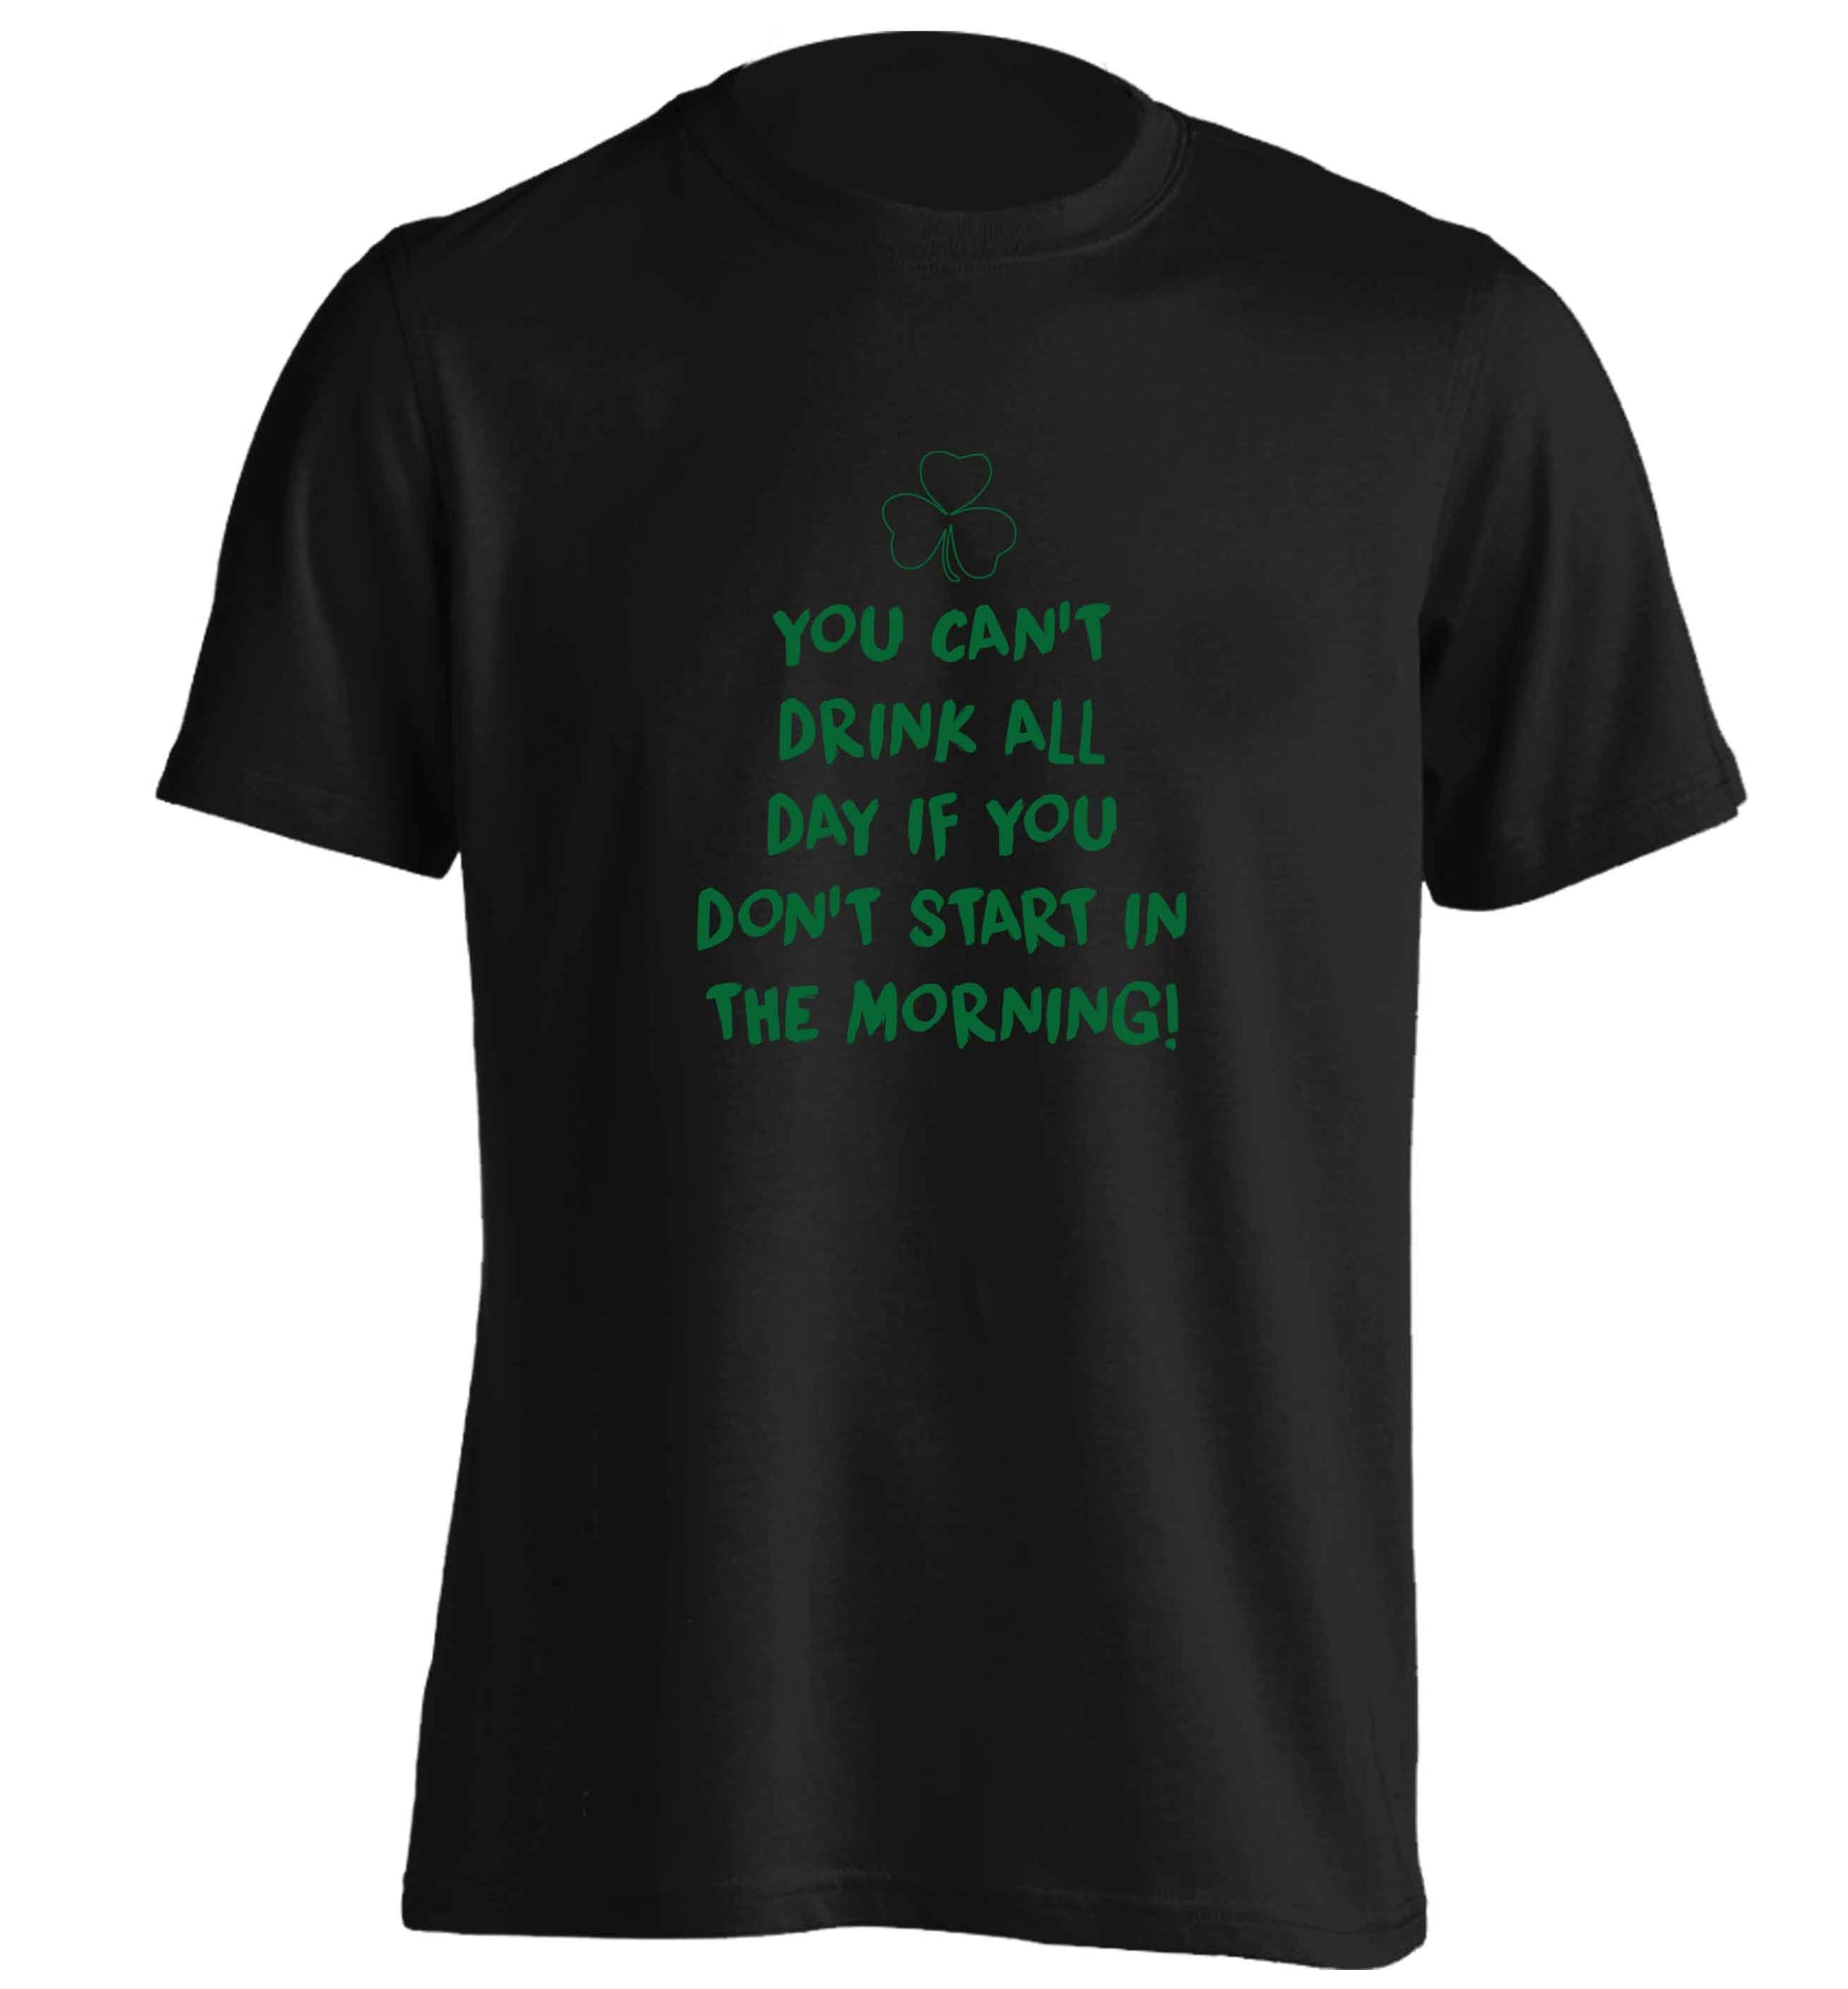 You can't drink all day if you don't start in the morning adults unisex black Tshirt 2XL